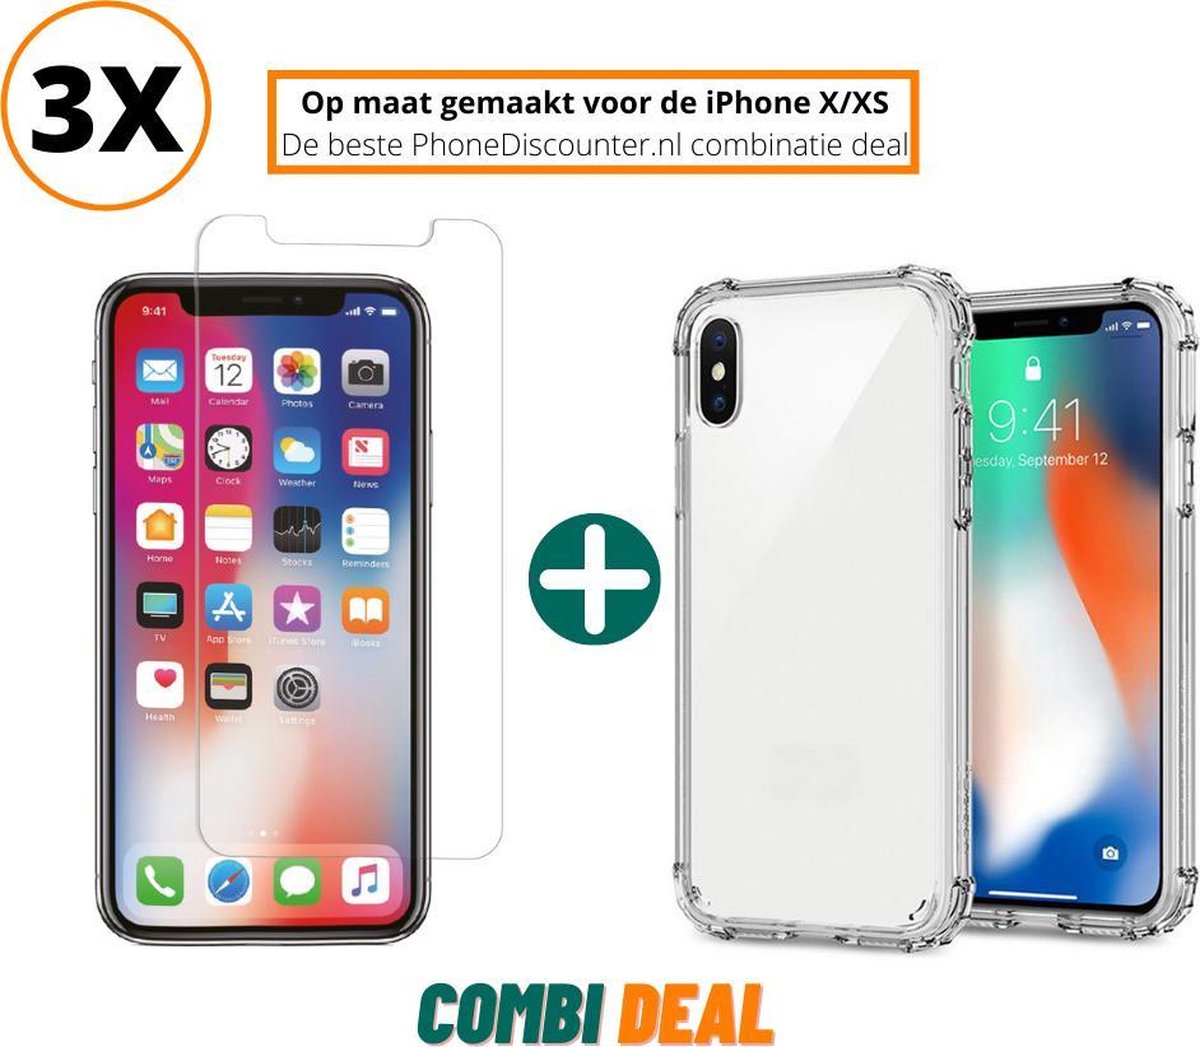 iphone x anti shock hoes | iPhone X siliconen case 3x | iPhone X schokbestendige hoes + 3x iPhone X tempered glass screenprotector